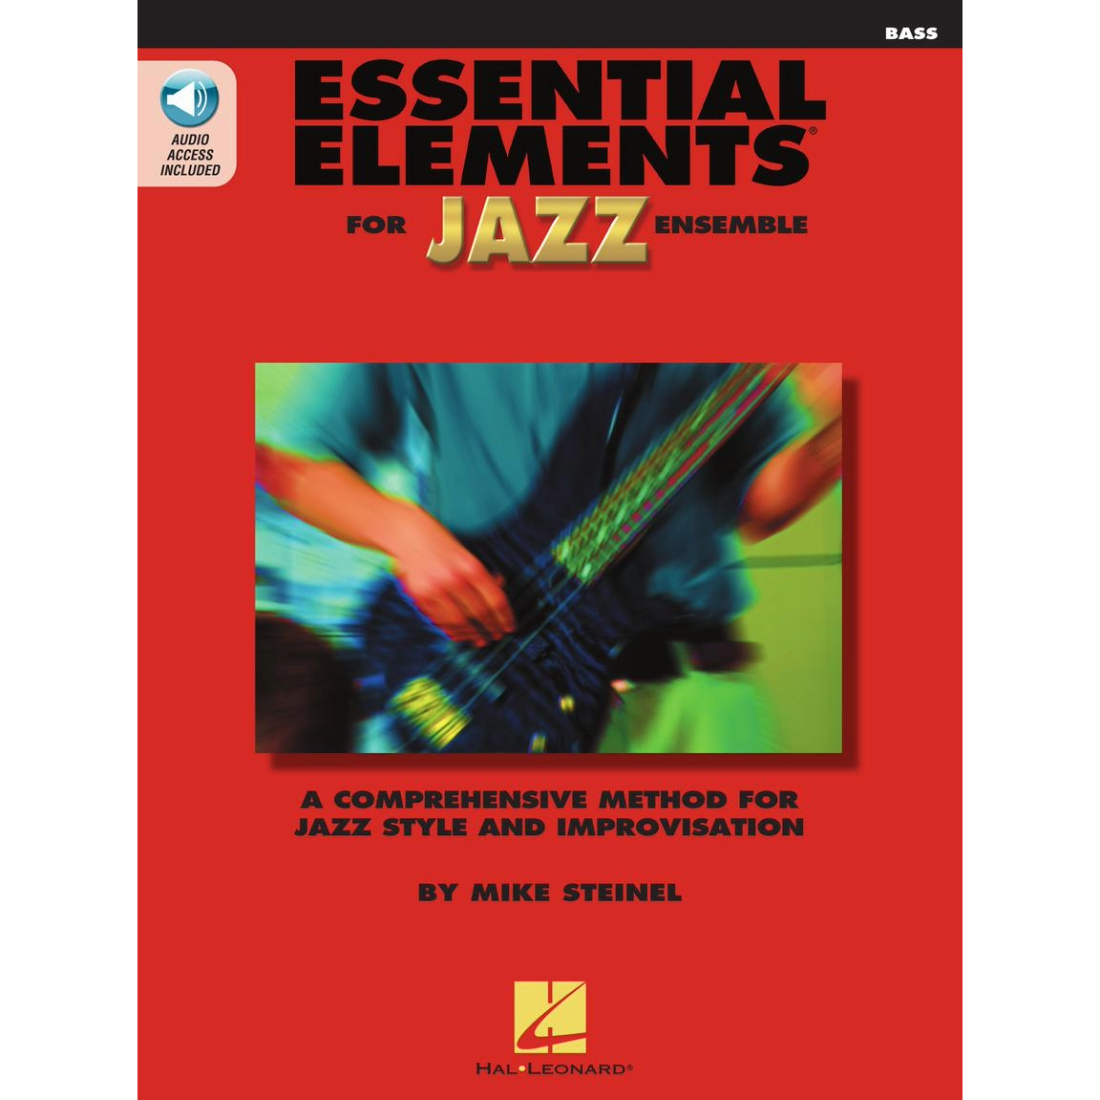 Red cover book with picture of instruments, titled essential elements for jazz ensemble.